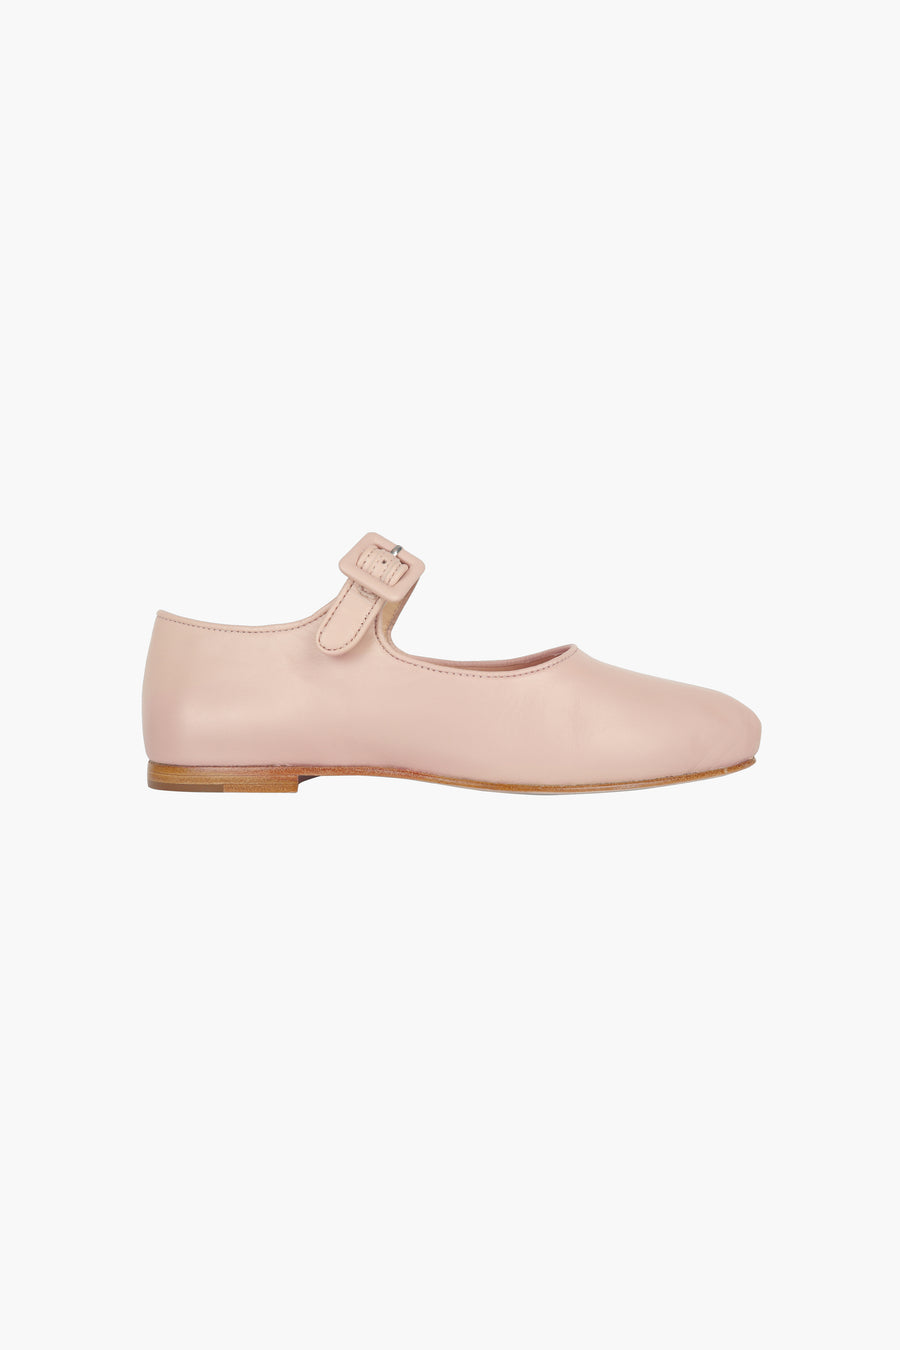 Mary Jane Pointe ballet flat shoe in ballet pink nappa leather